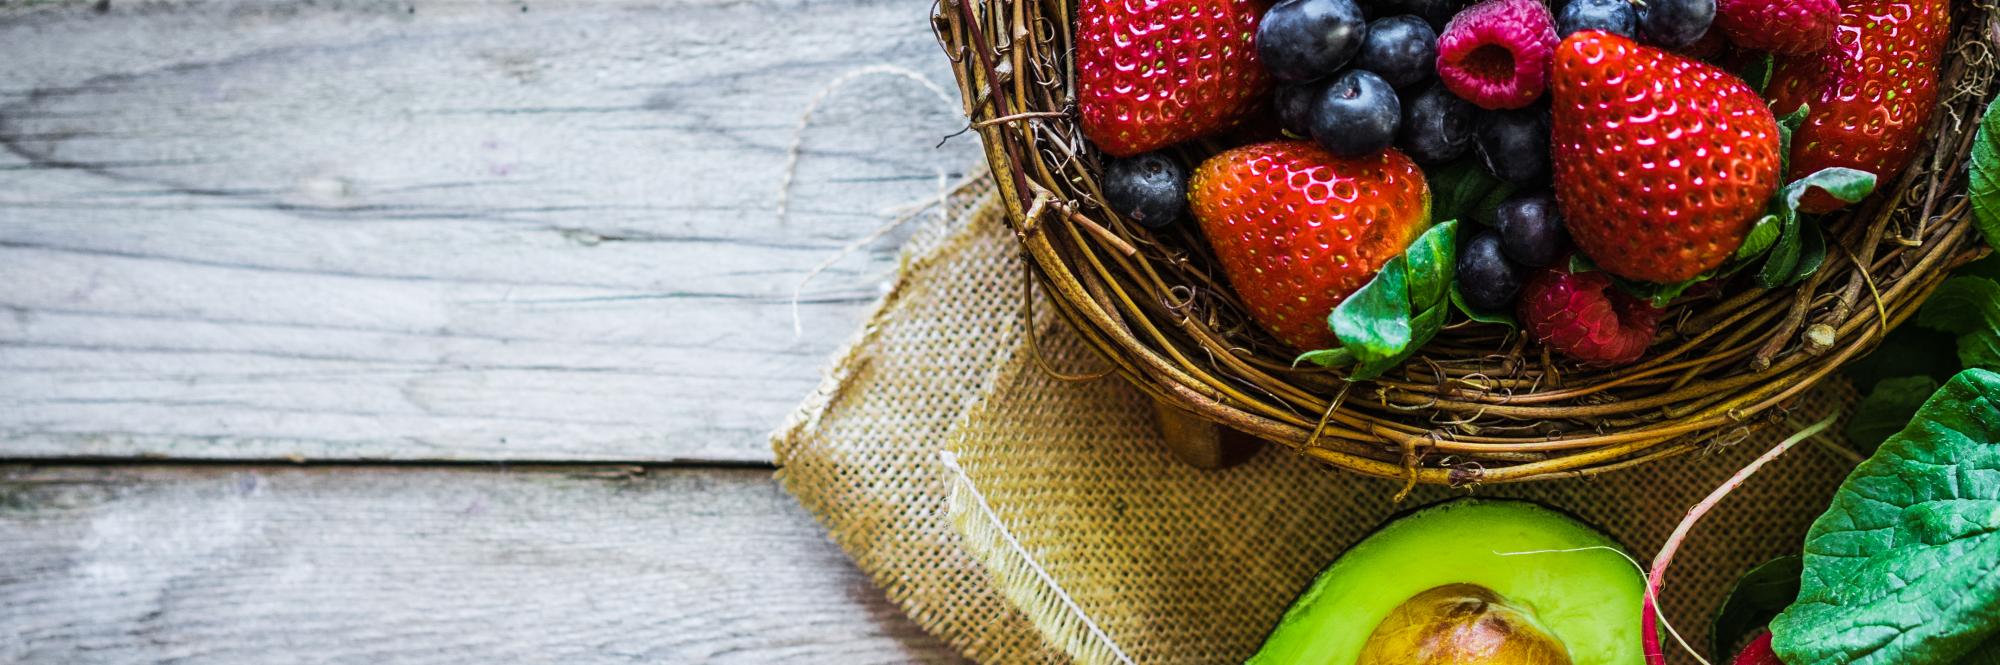 Close-up of a basket with strawberries and blueberries, half an avocado, and a bunch of radishes on a wooden table.